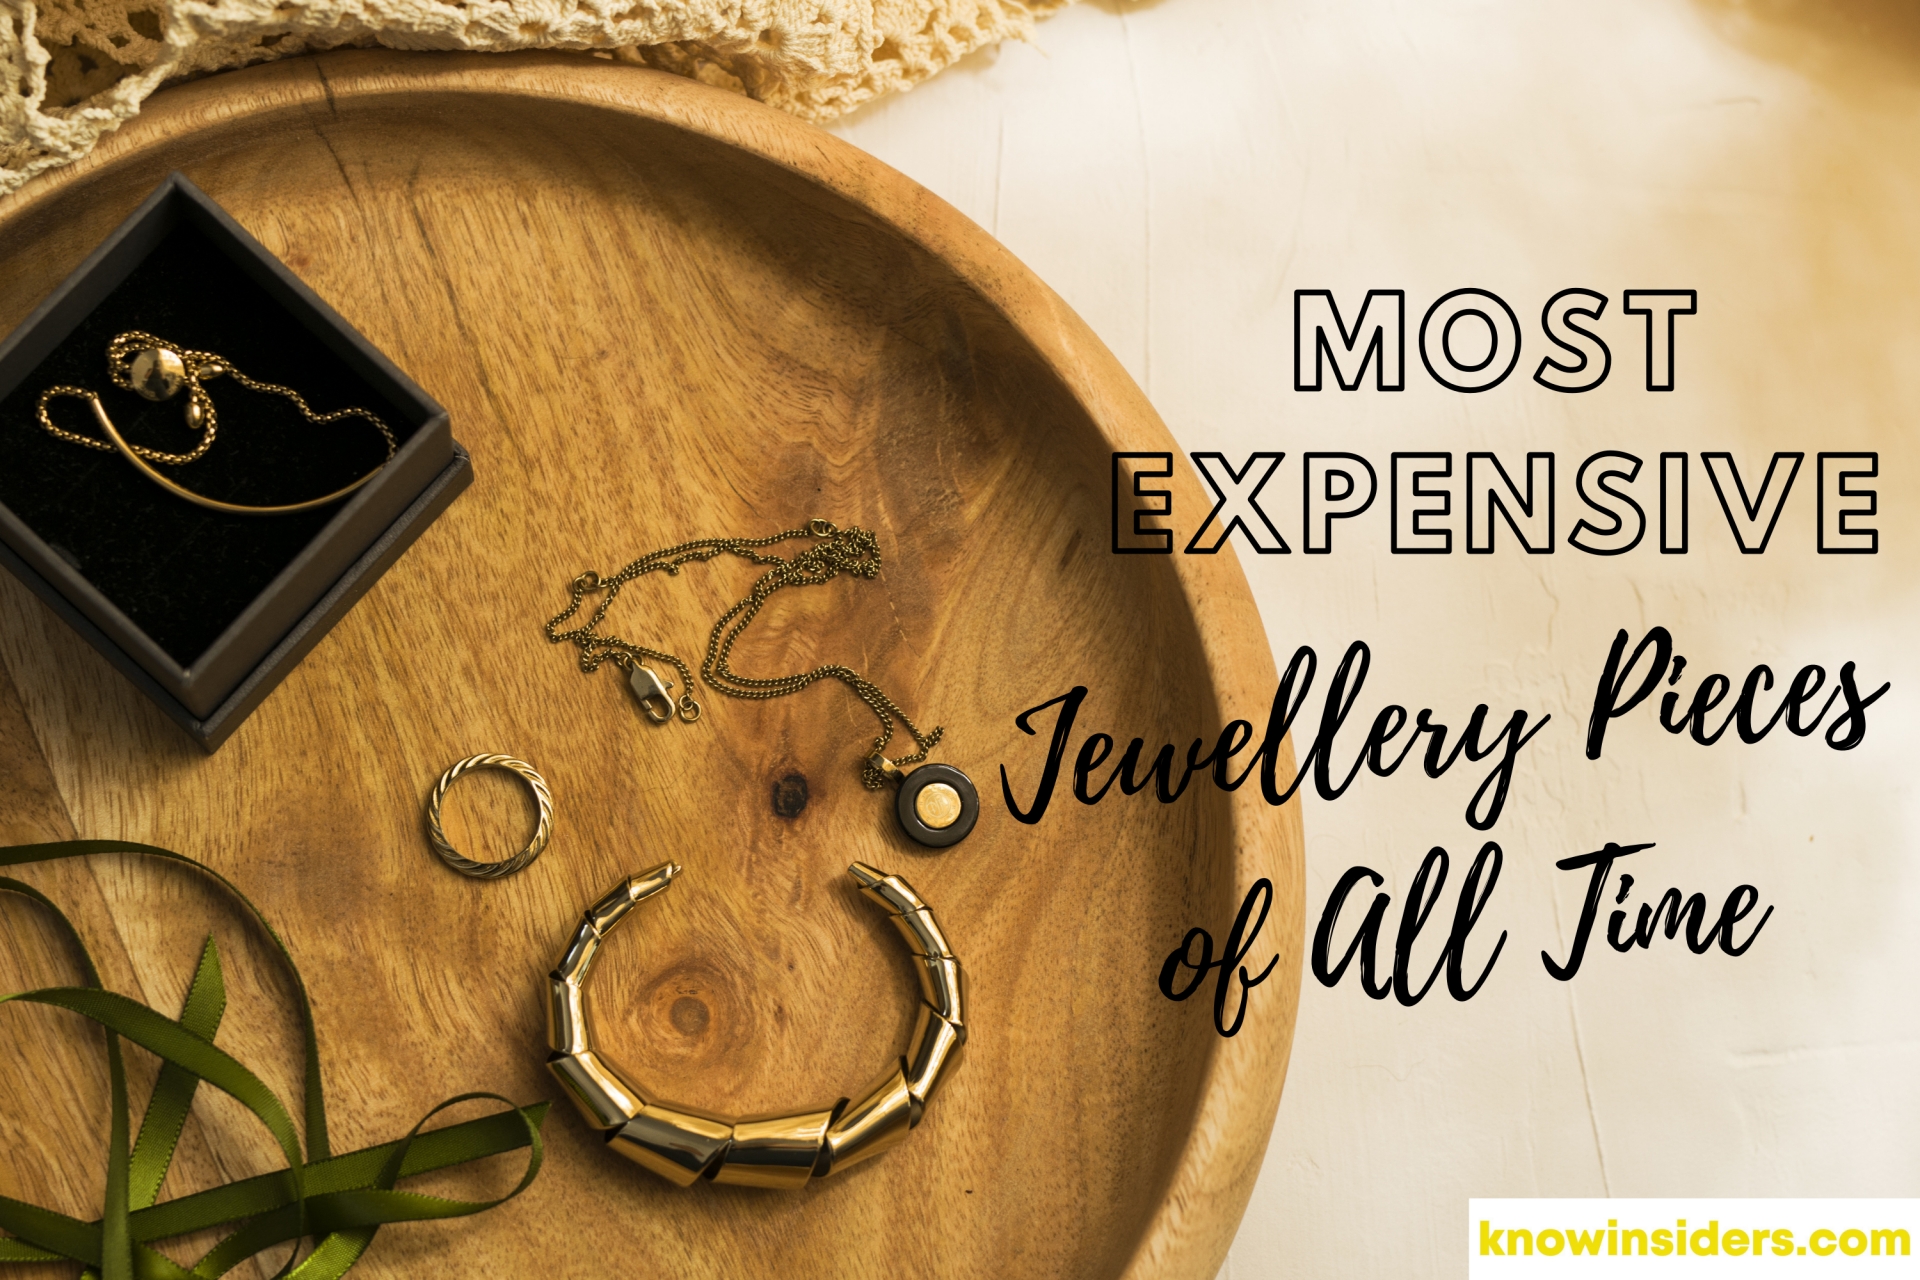 Top 10 Most Expensive Jewellery Pieces In The World Of All Time